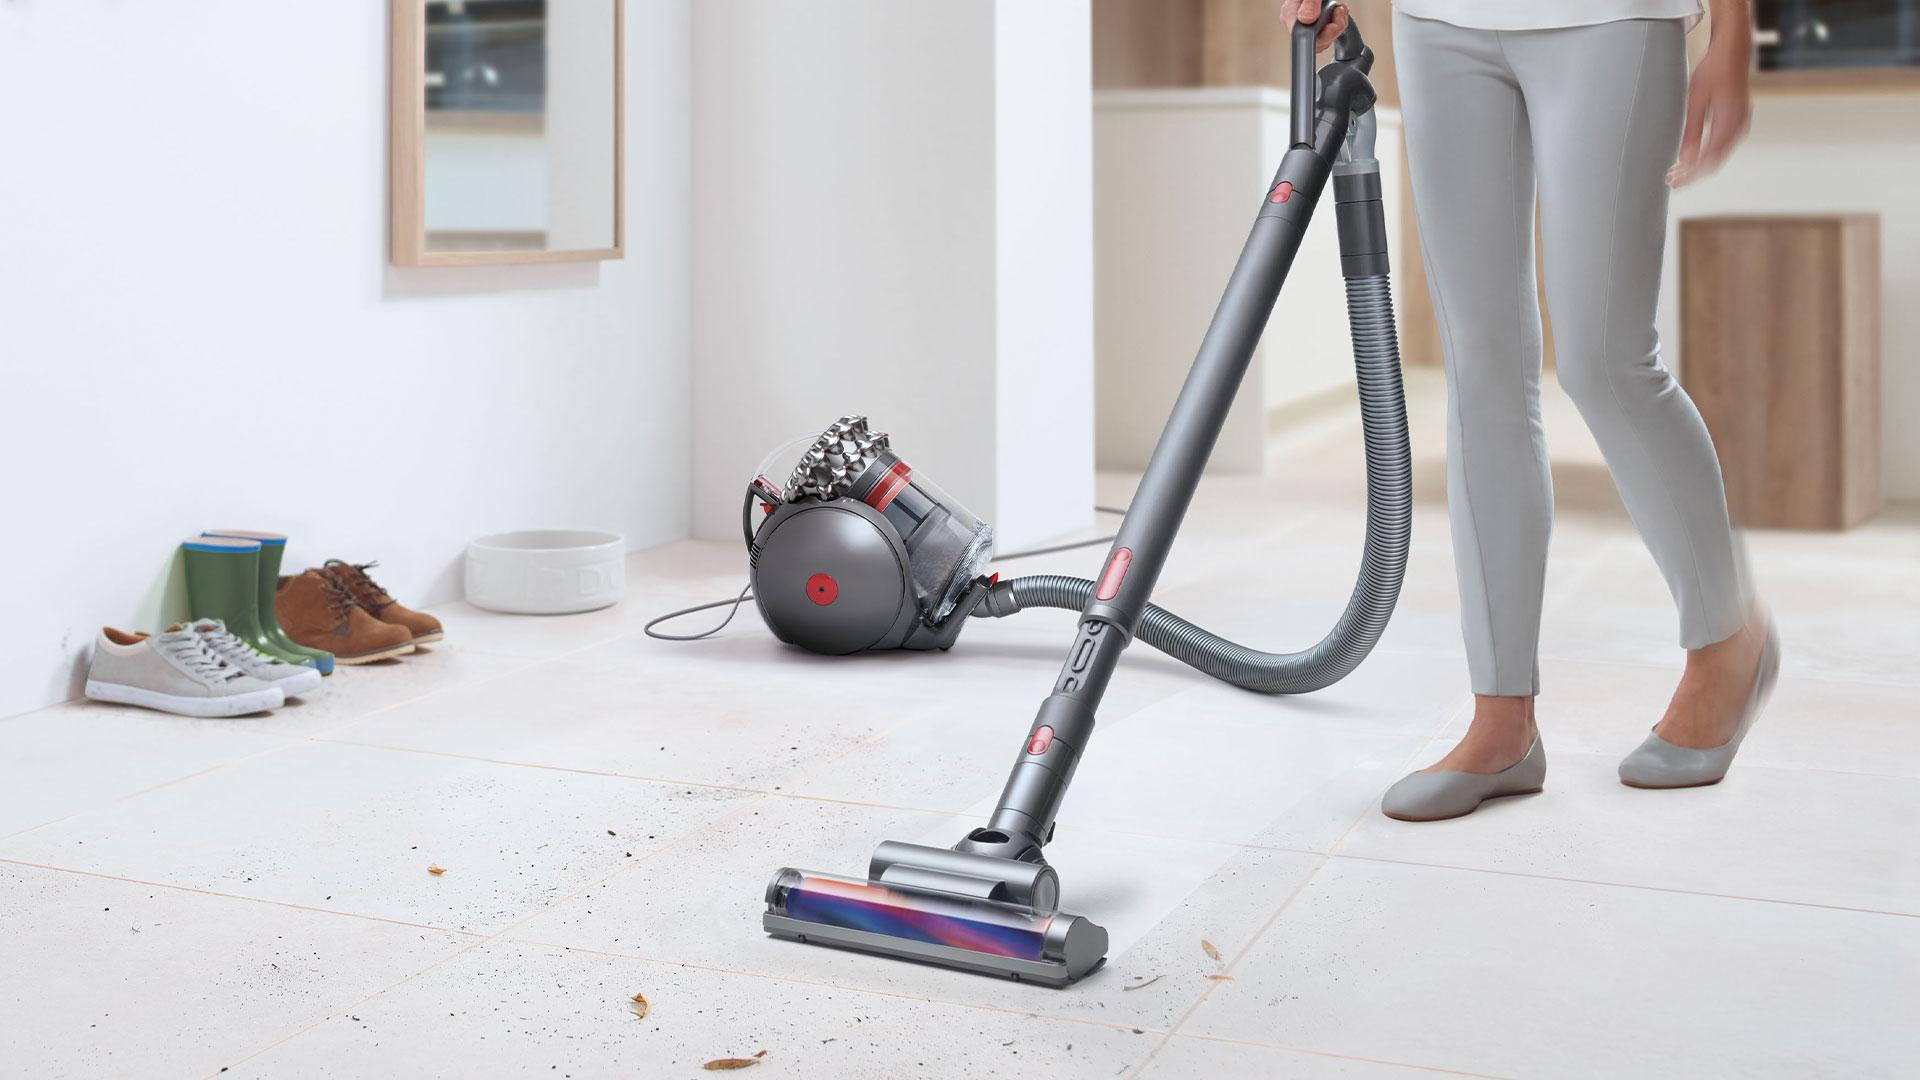 Dyson corded vacuum cleaner on tiles